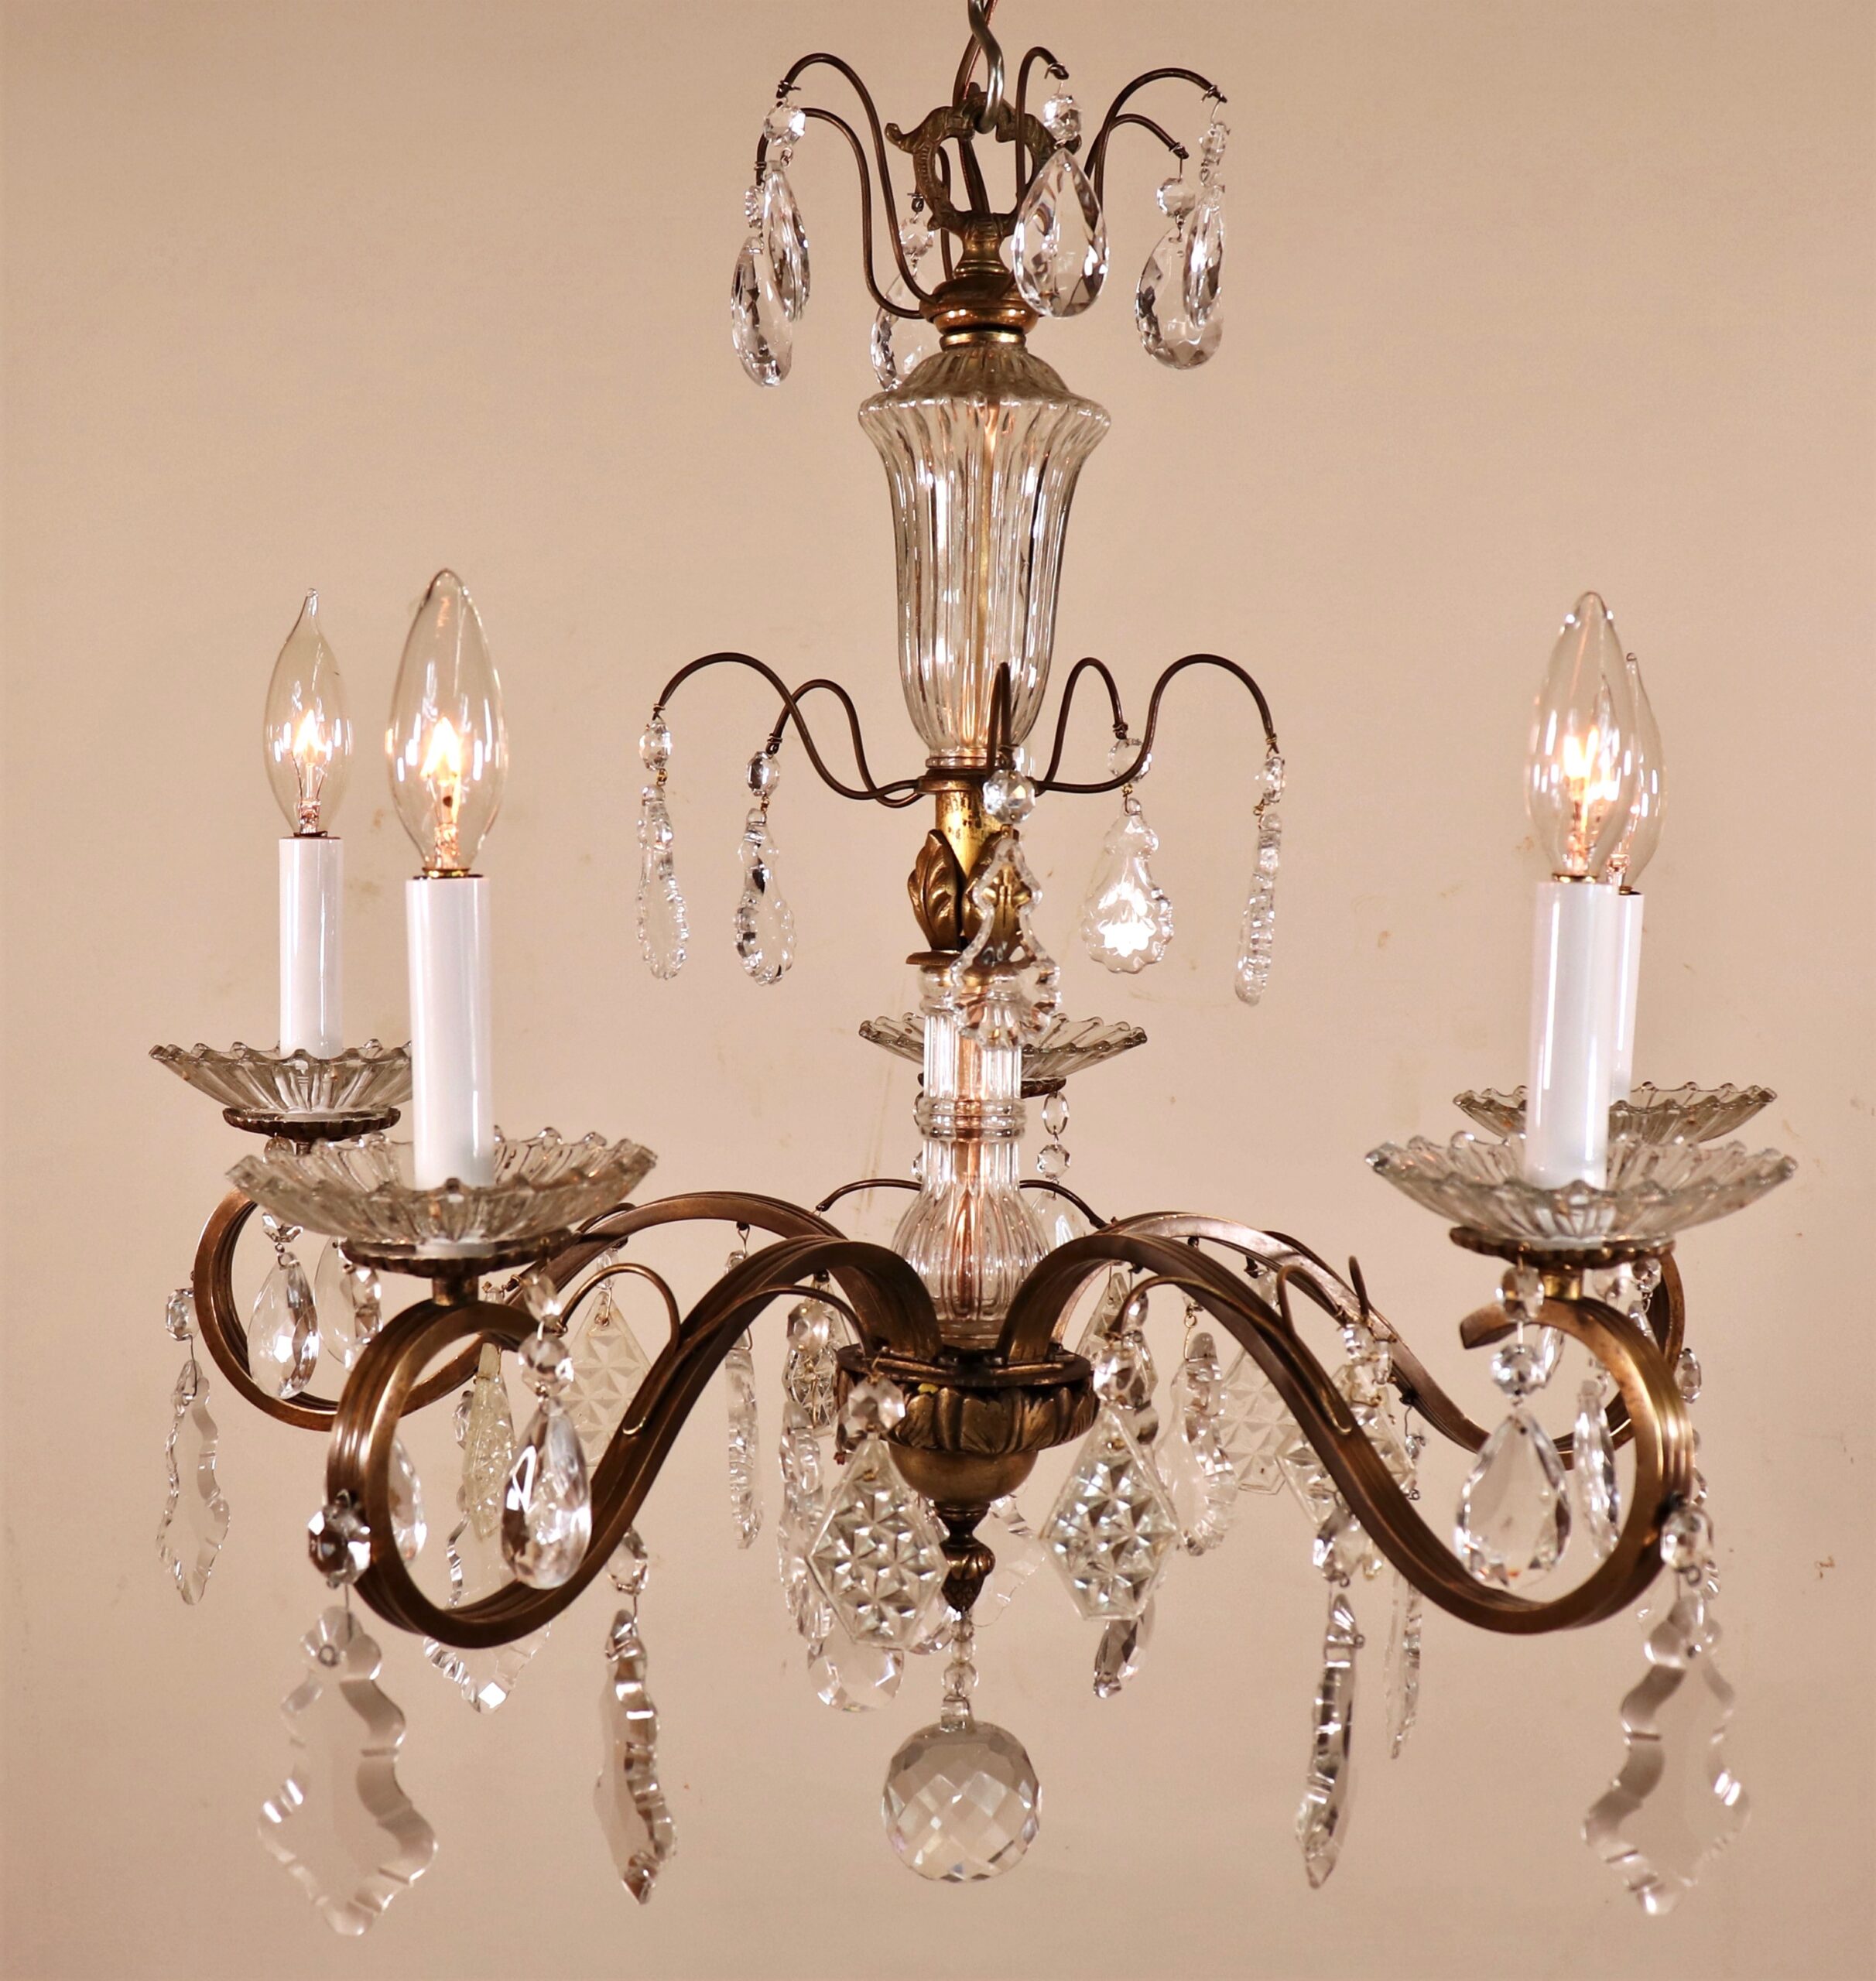 Circa 1930 French Brass and Crystal Chandelier - Antiques Resources, Chicago